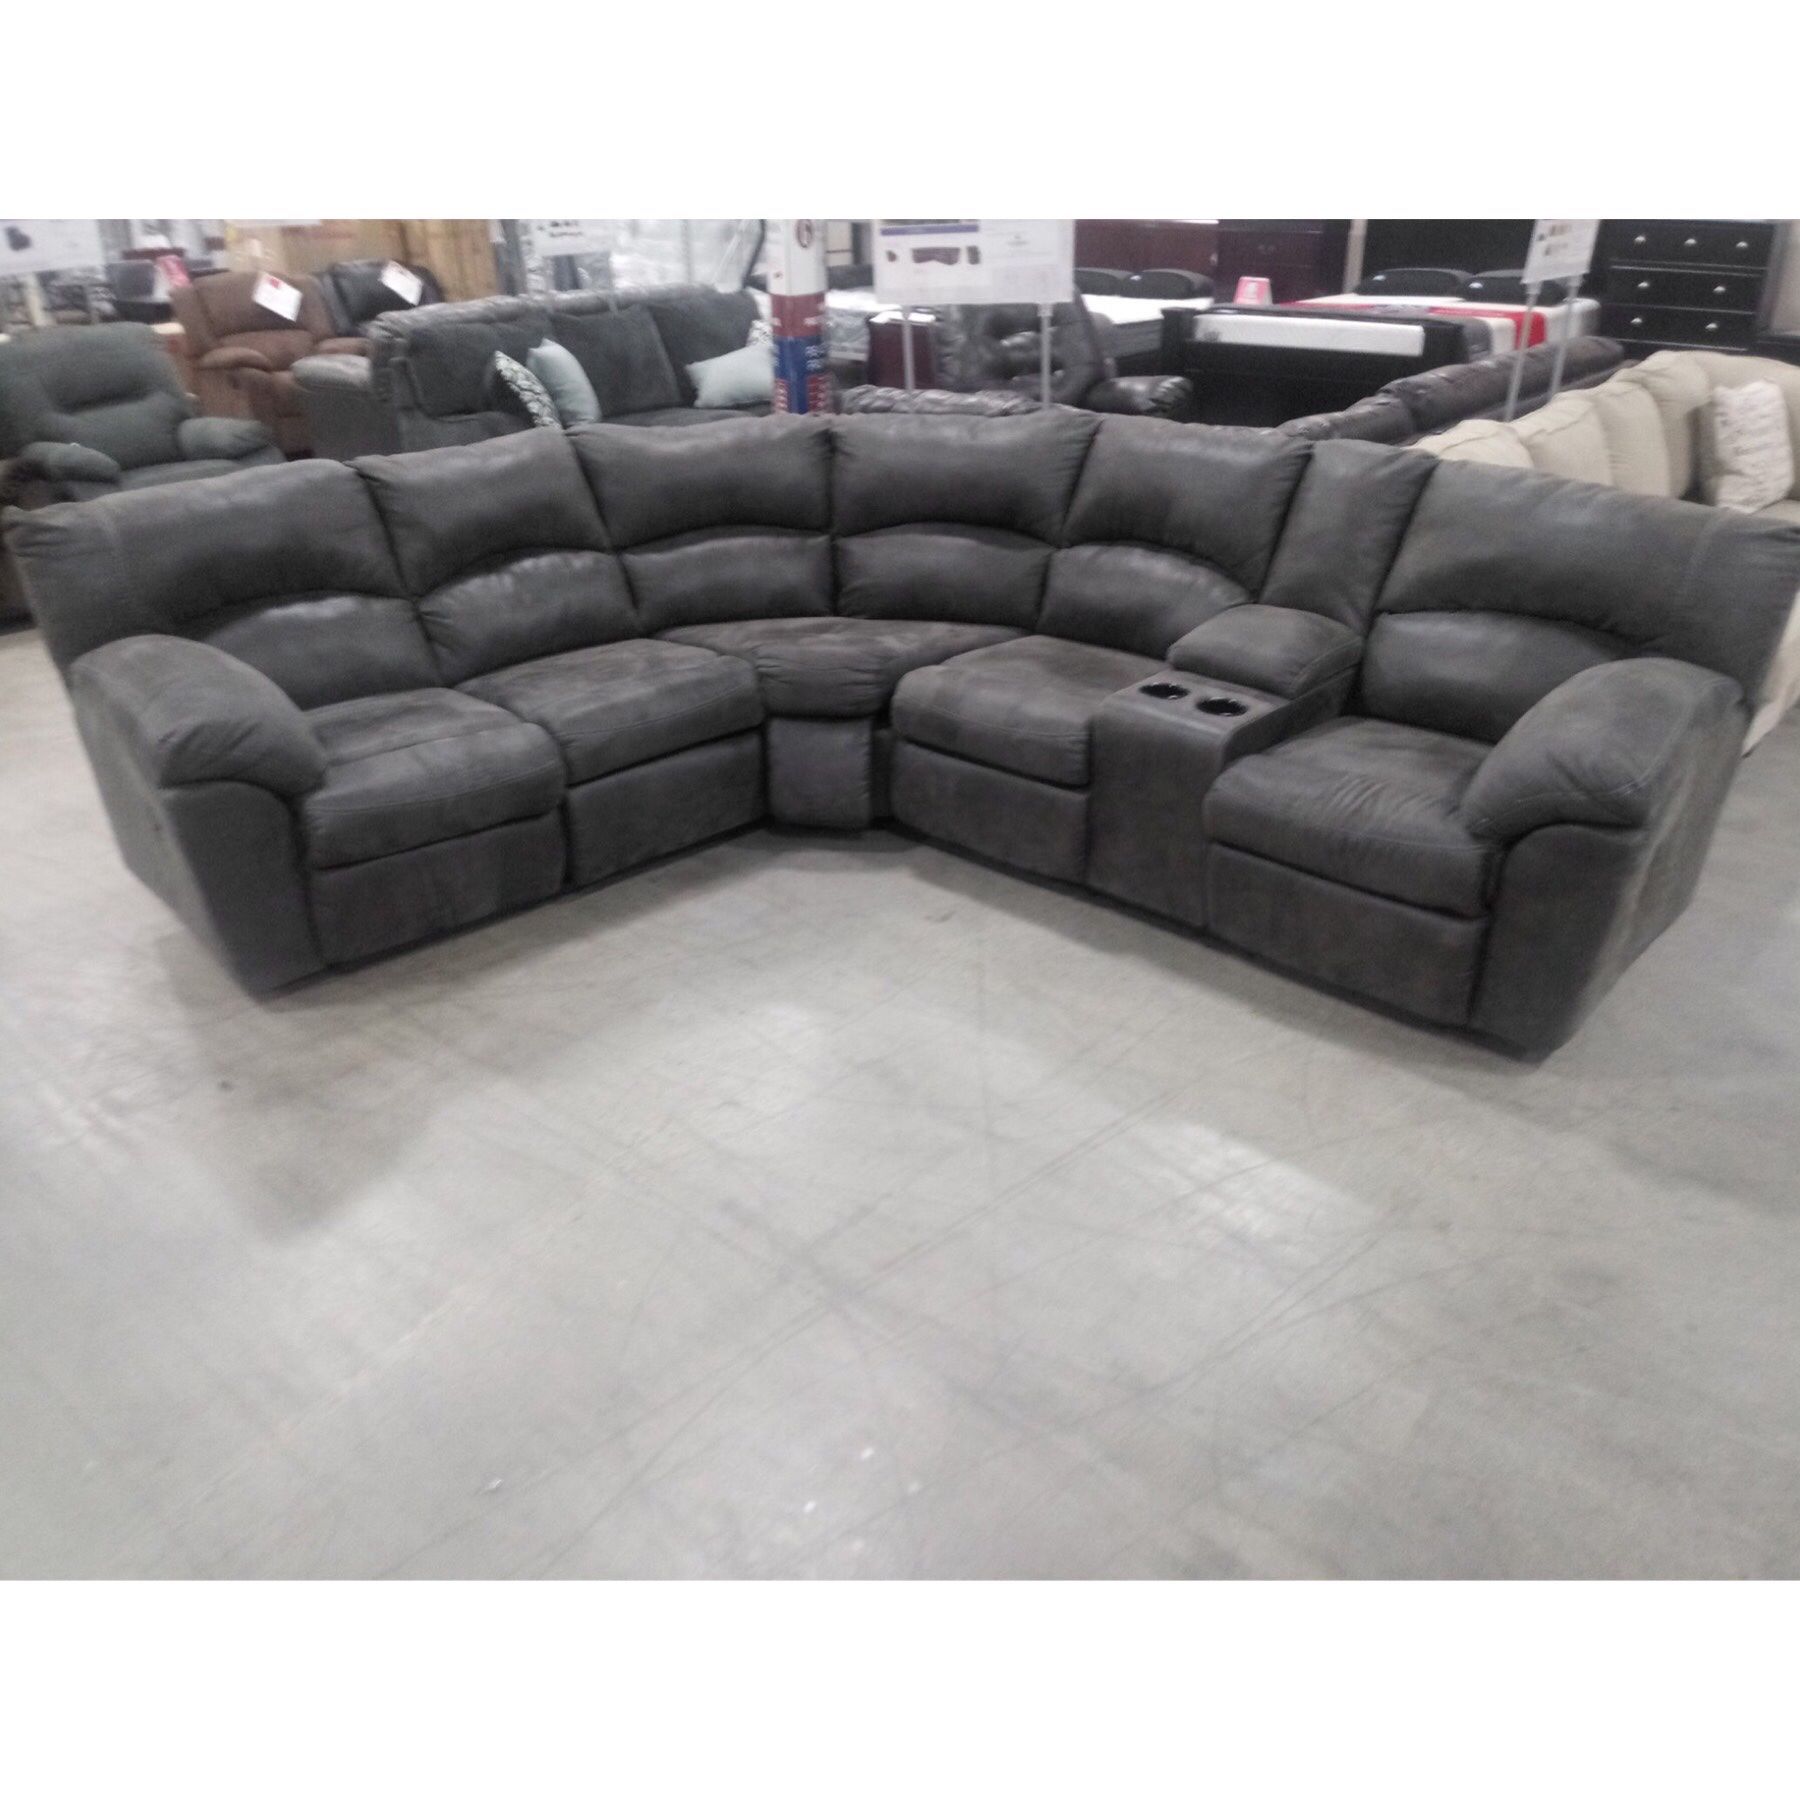 Brand New Reclining Sectional Available For Immediate Delivery